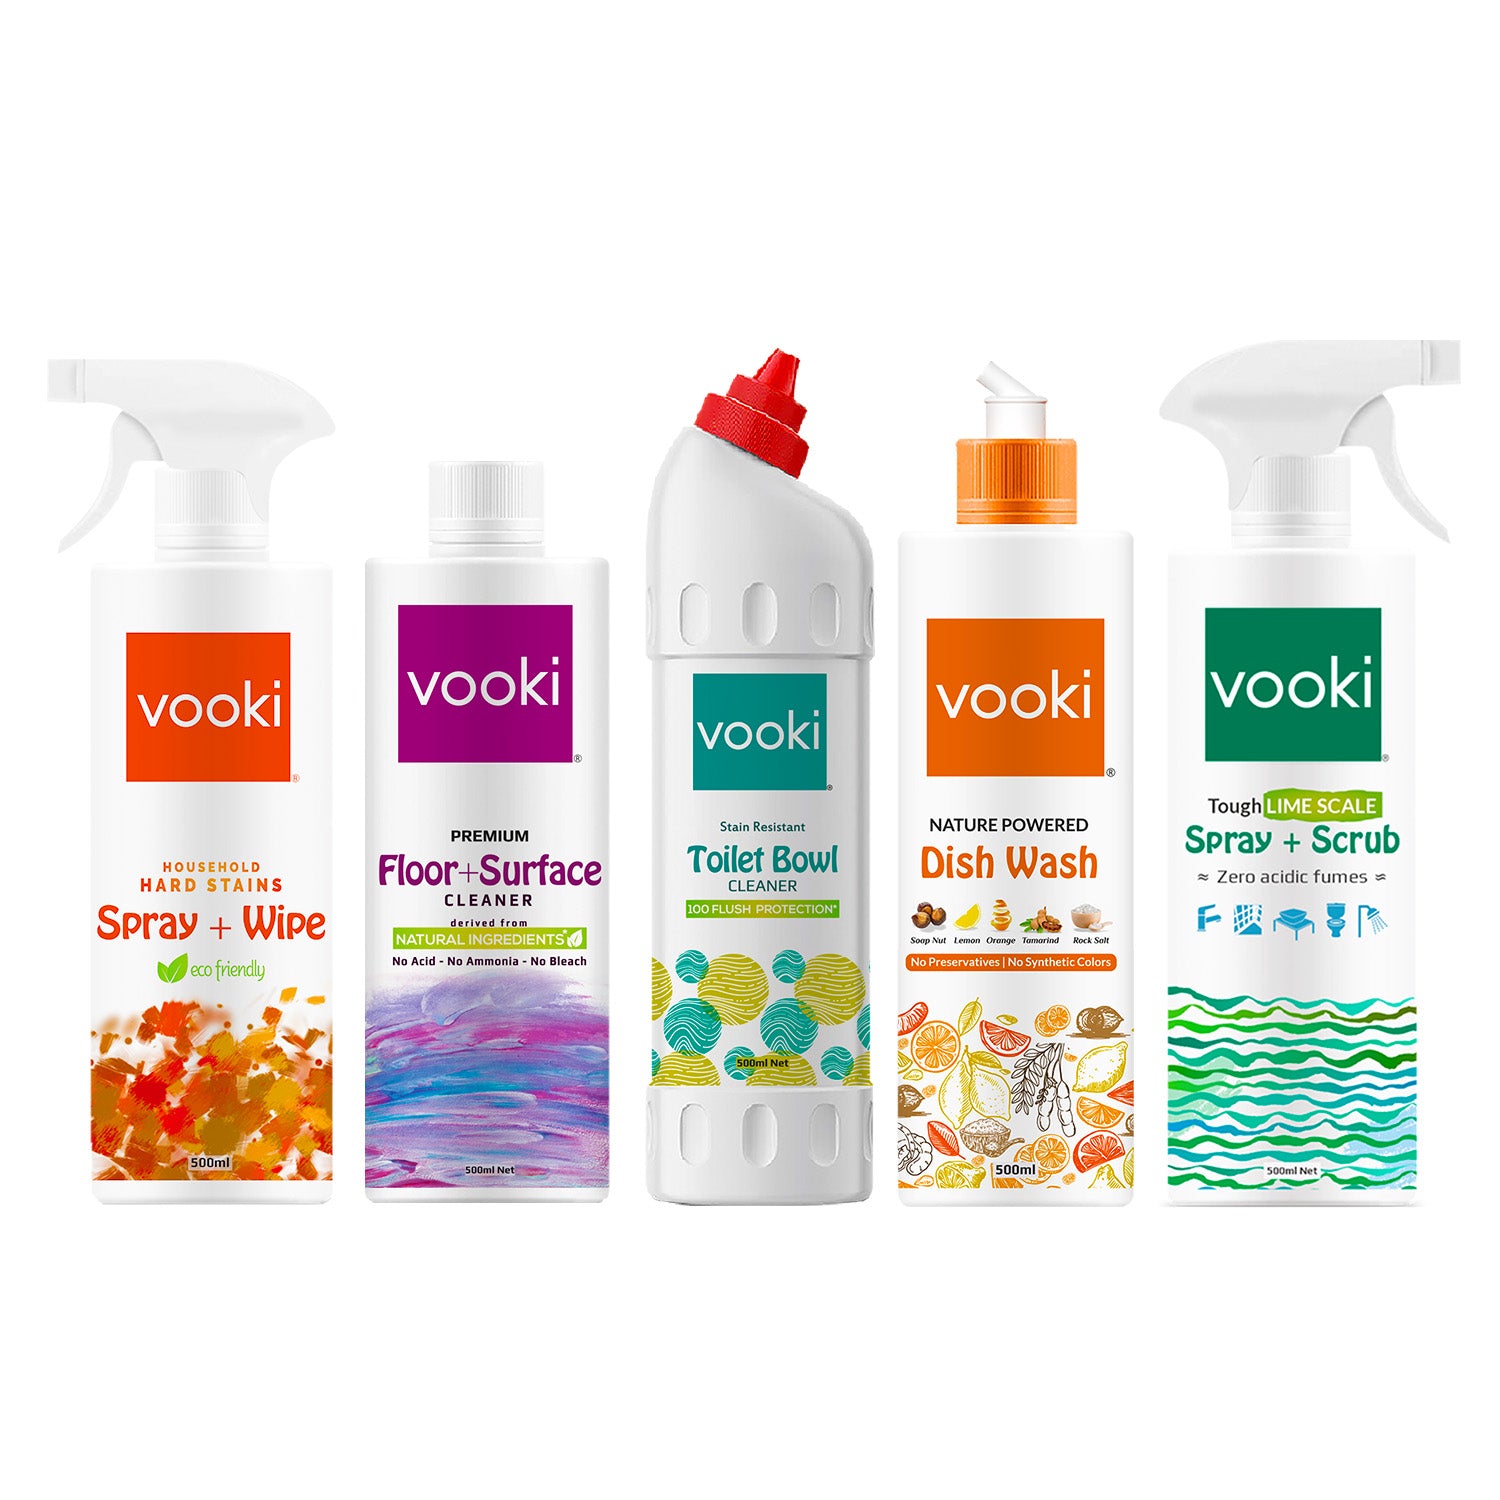 vooki cleaning products: a range of effective and eco-friendly cleaning solutions for your home.